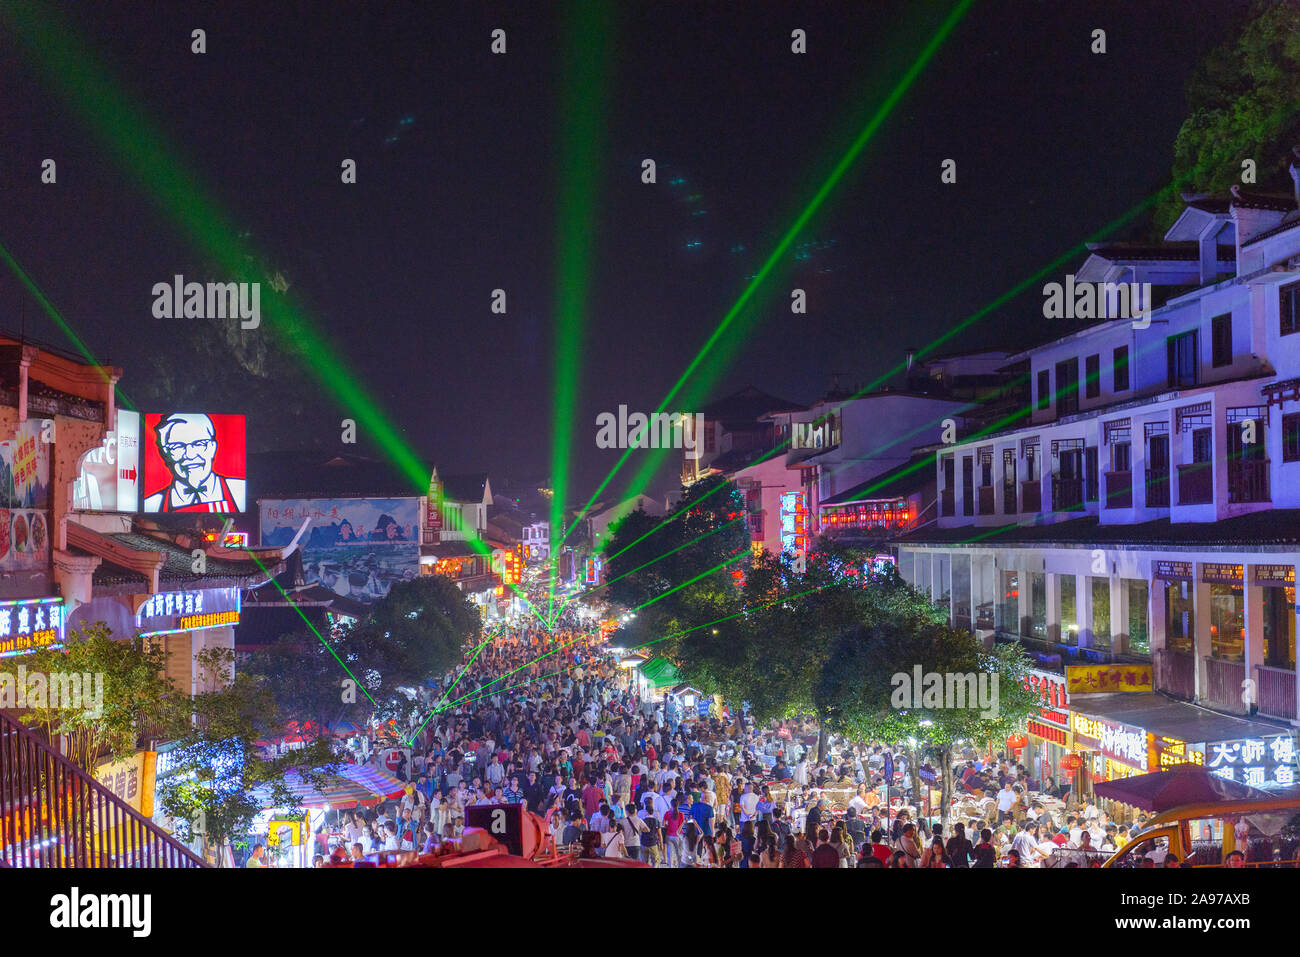 YANGSHUO, CHINA - MAY 27, 2014: Laser lights paint the night sky while large crowds attend an evening festival. Stock Photo